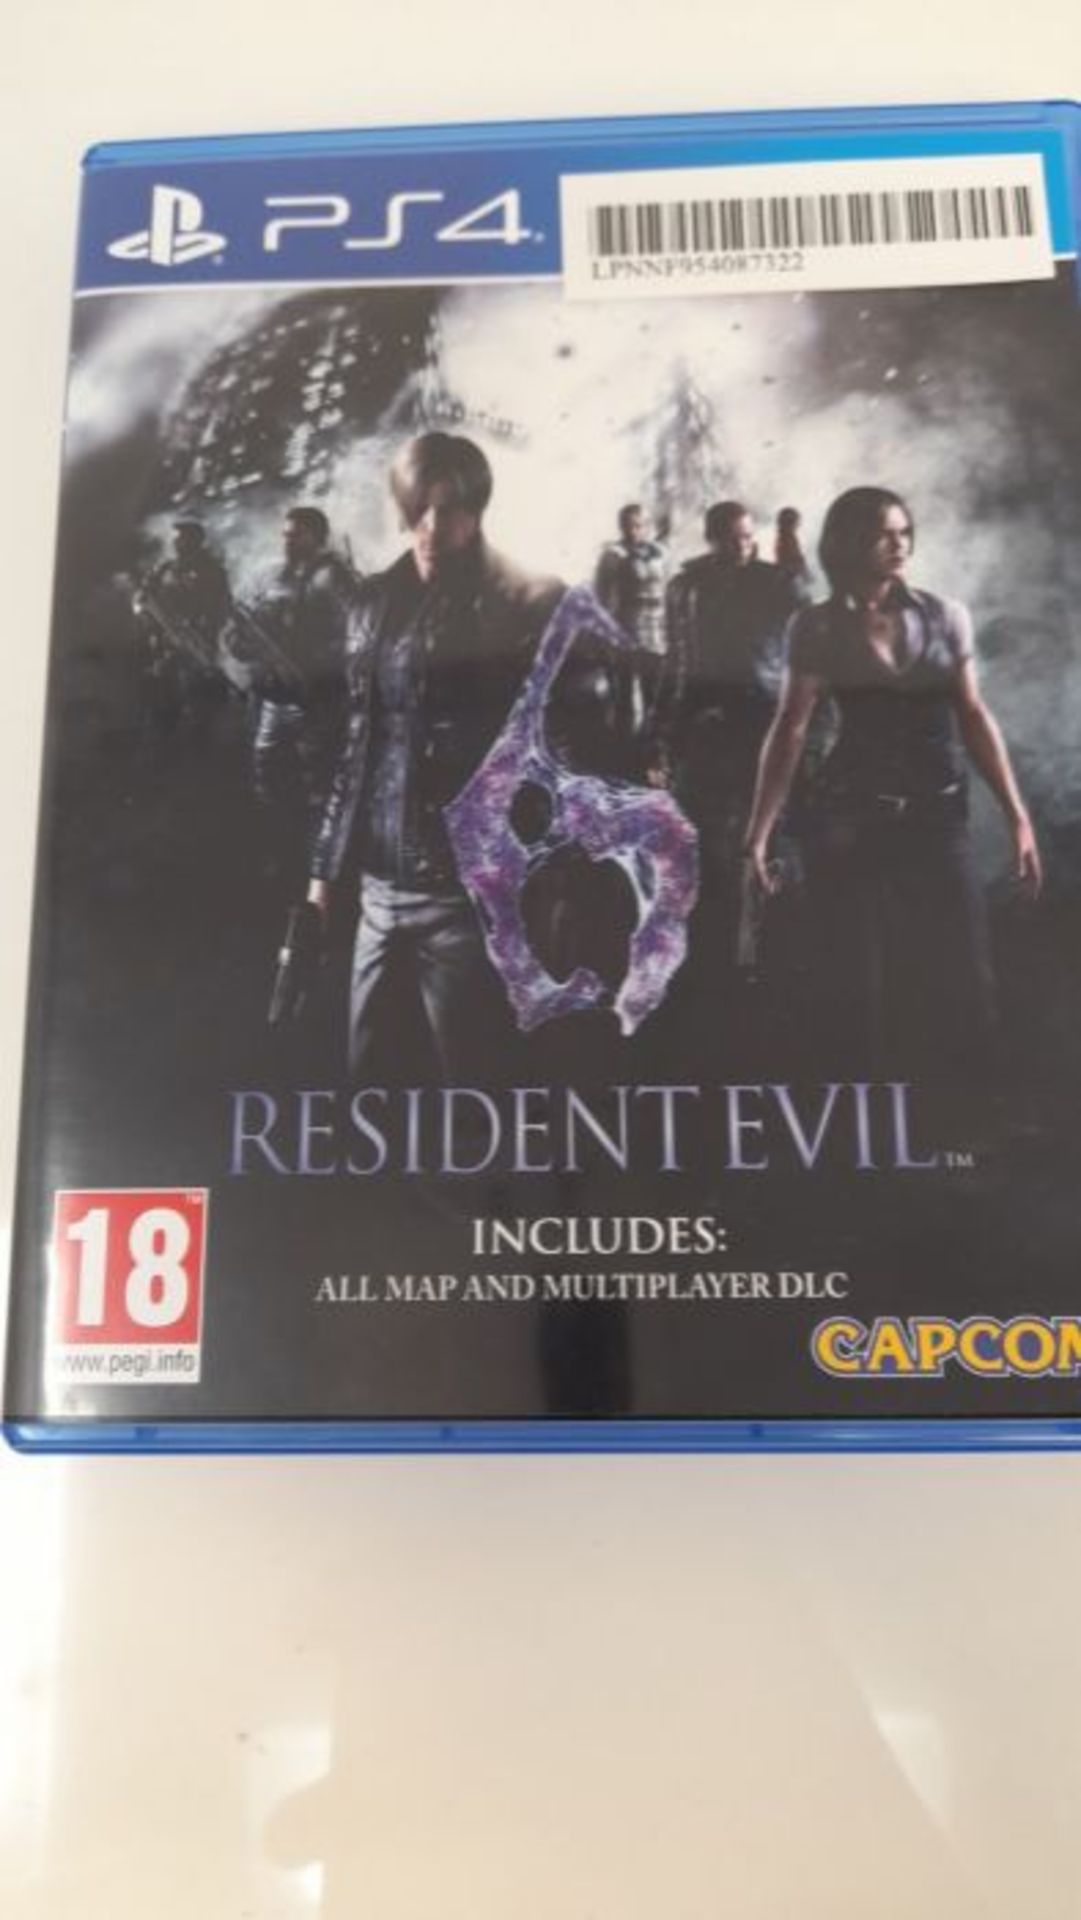 Resident Evil 6 (PS4) - Image 2 of 3